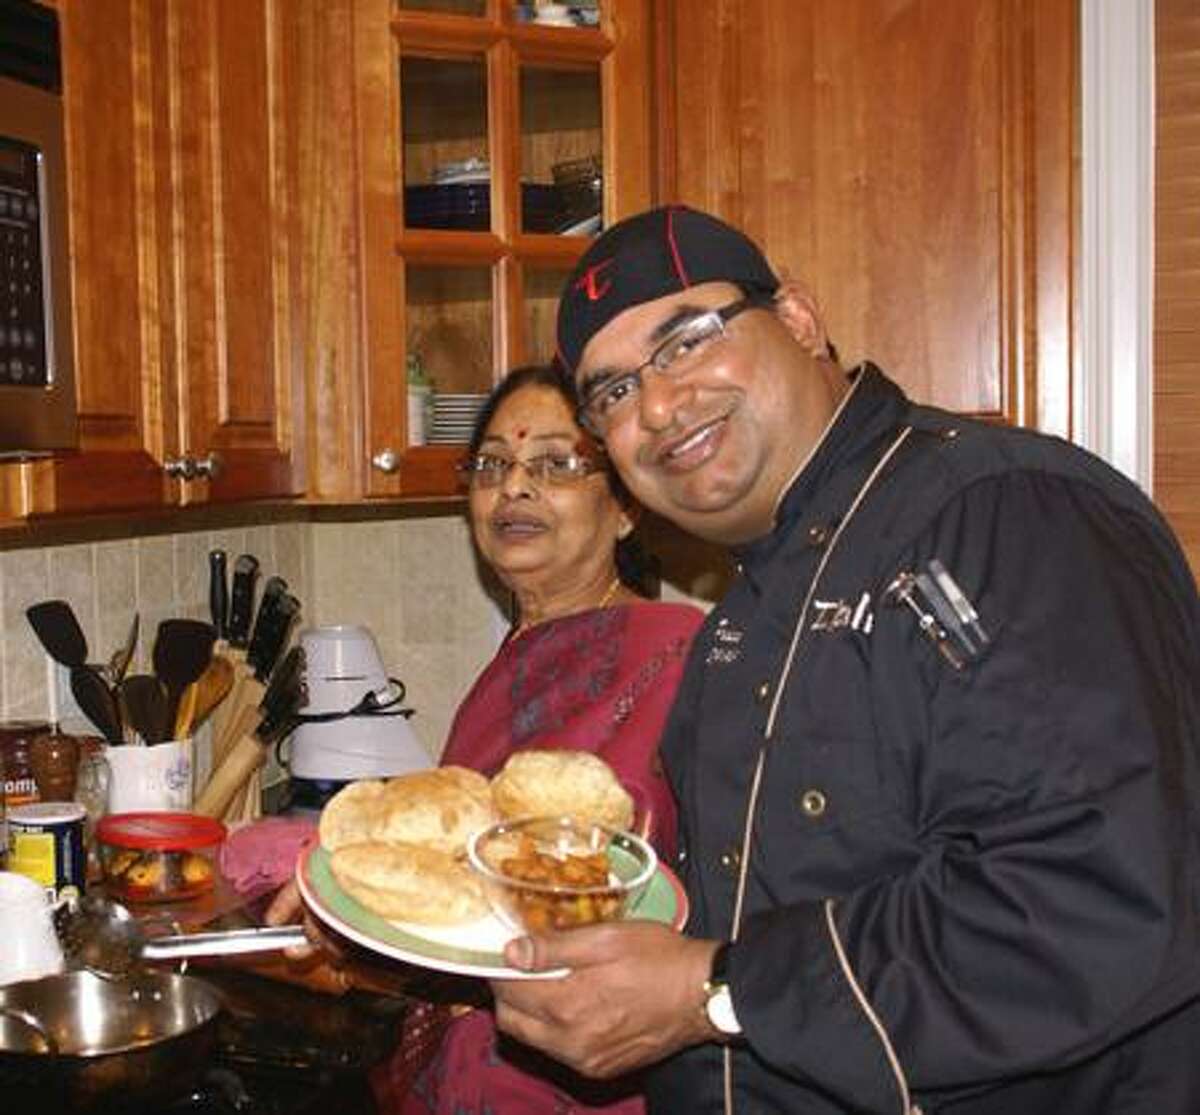 Contributed photo: Restaurateur Prasad Chirnomula, who owns Thali, Thali Too and Oaxaca Kitchen in New Haven, as well as three other restaurants in Connecticut, says there's no better cook than mom, Laxmi Chirnomula of Stamford.